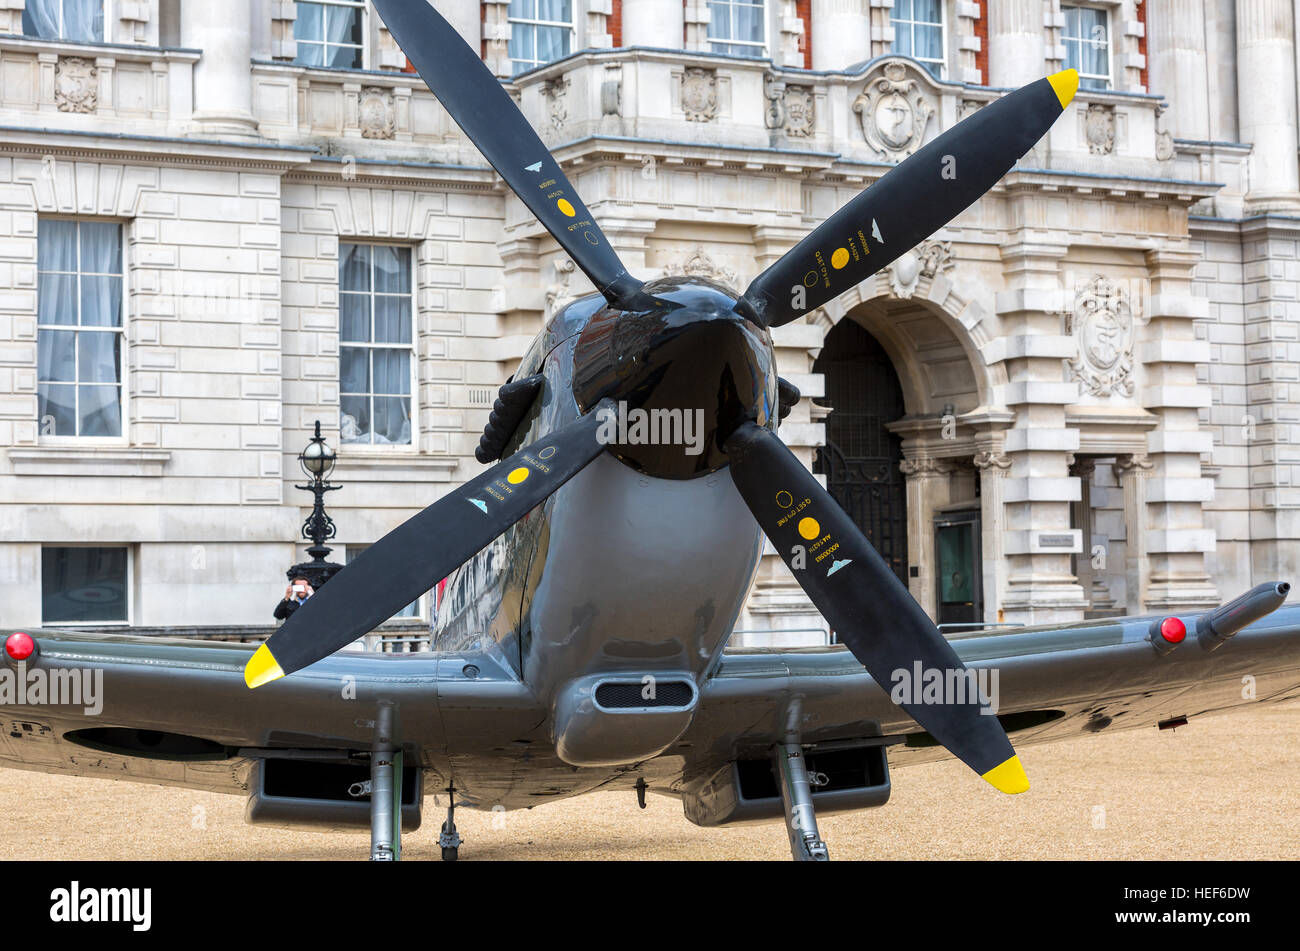 A WWII Supermarine Spitfire parked at the Horse Guards' Parade in Central London, UK. Stock Photo